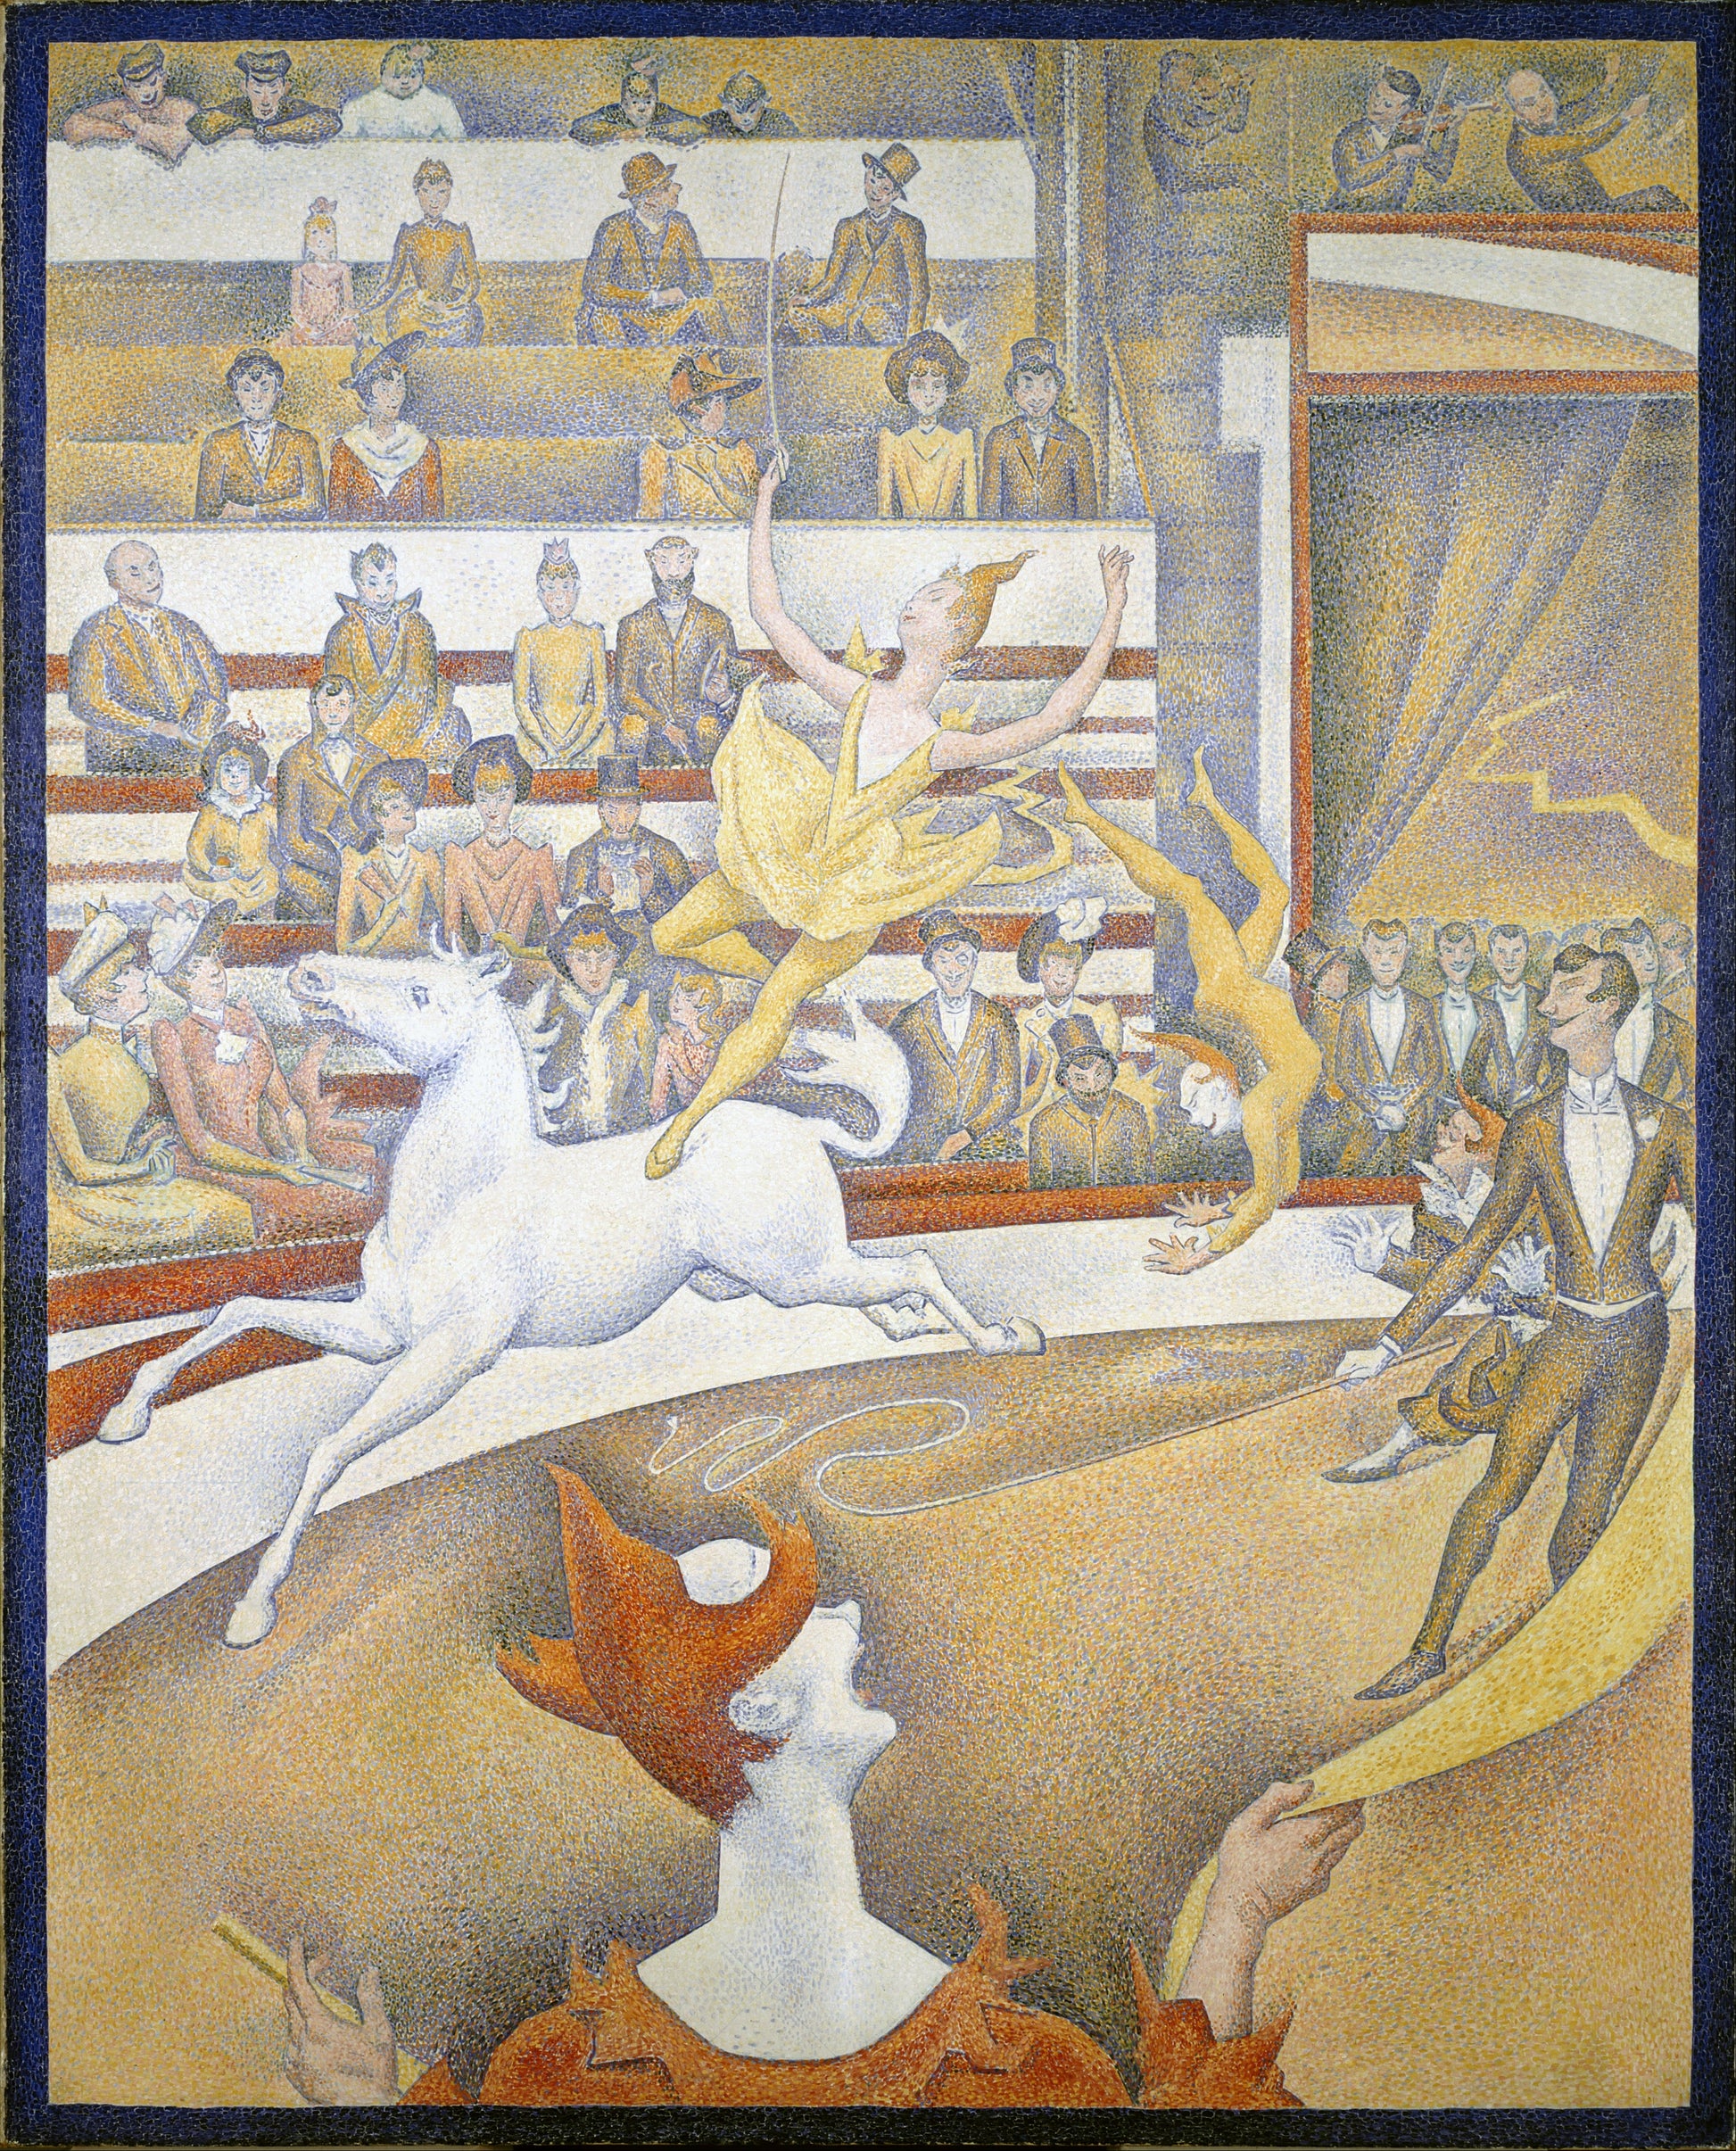 The Circus (1880s) | Georges Seurat prints Posters, Prints, & Visual Artwork The Trumpet Shop   